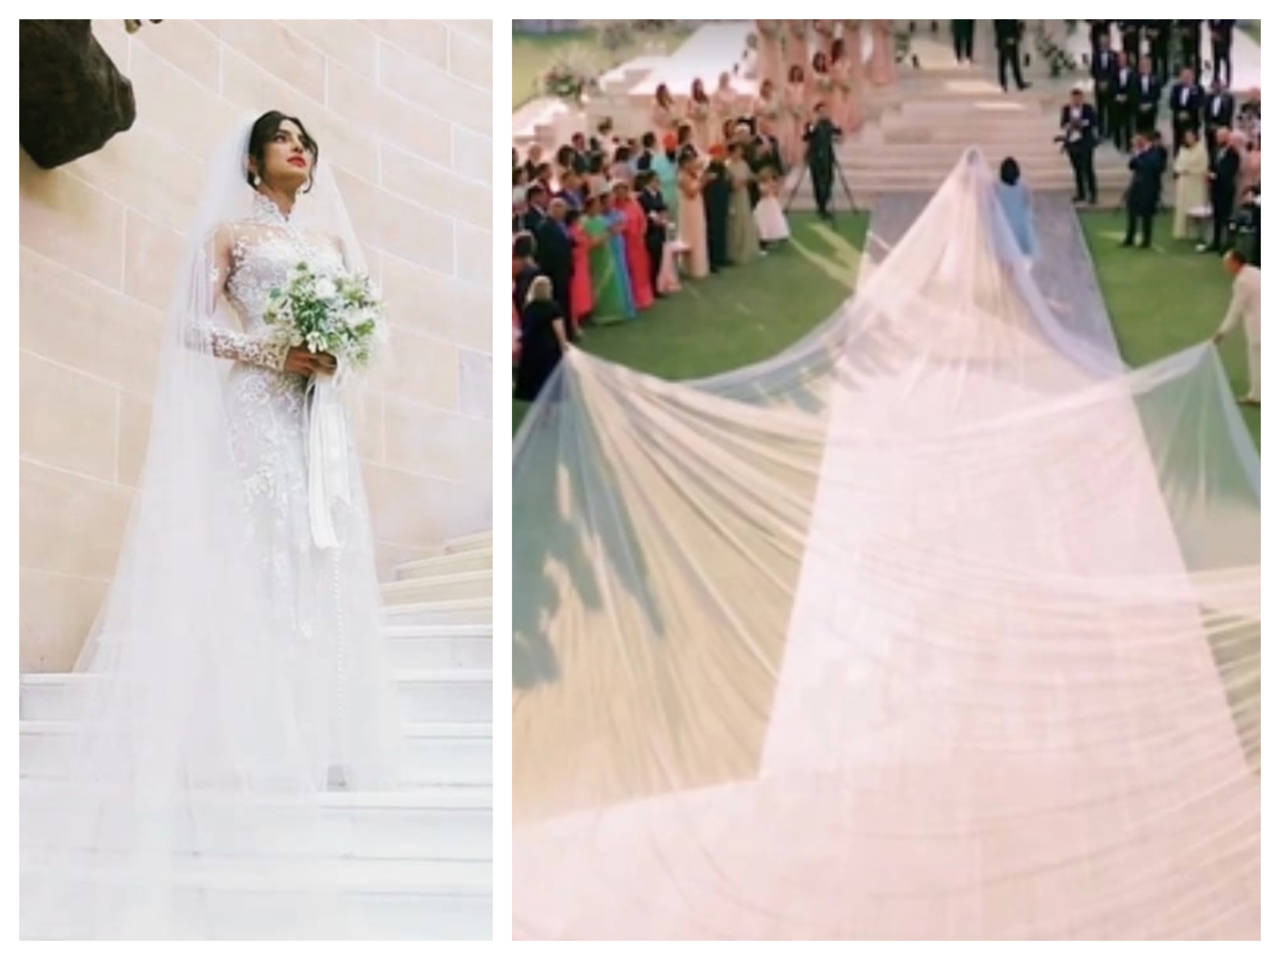 Priyanka Chopra opens up about her gorgeous white bridal gown